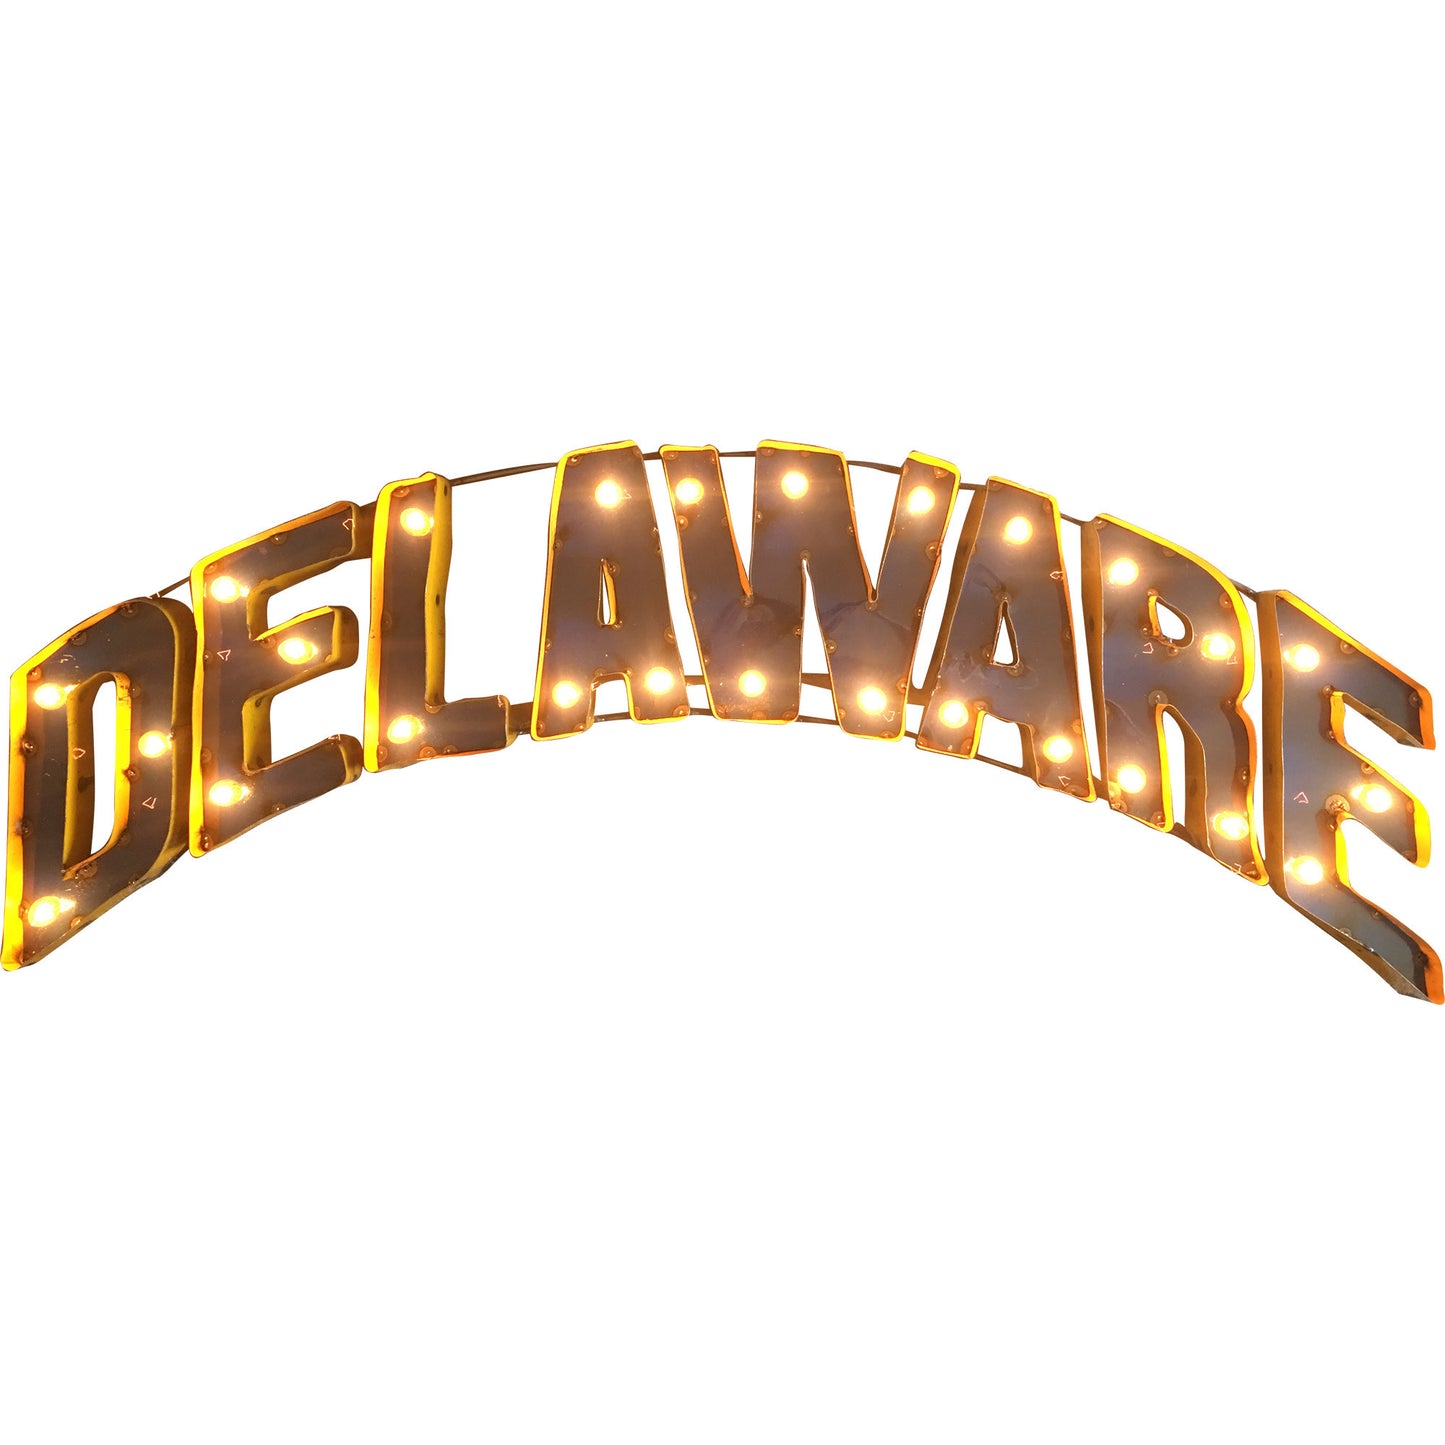 University of Delaware "Delaware" Lighted Recycled Metal Wall Decor